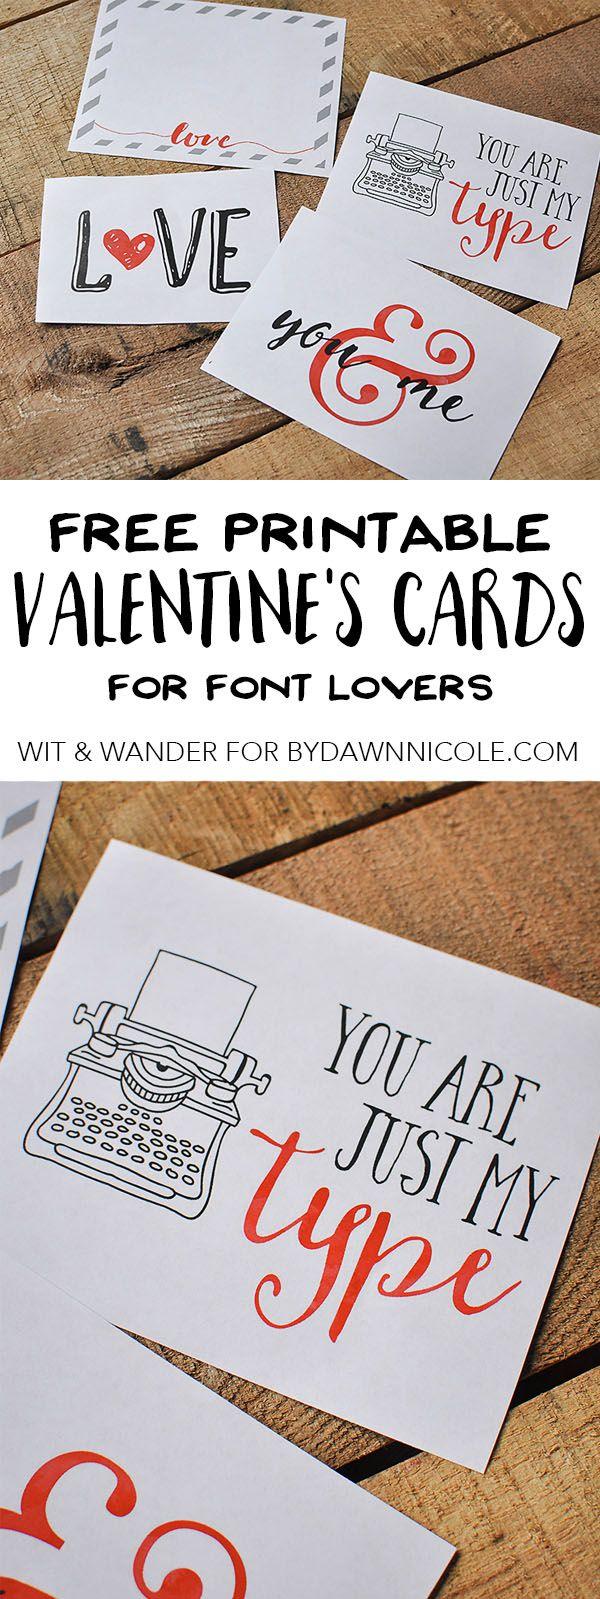 Wedding - Free Printable Font-Lovers Valentines Day Cards